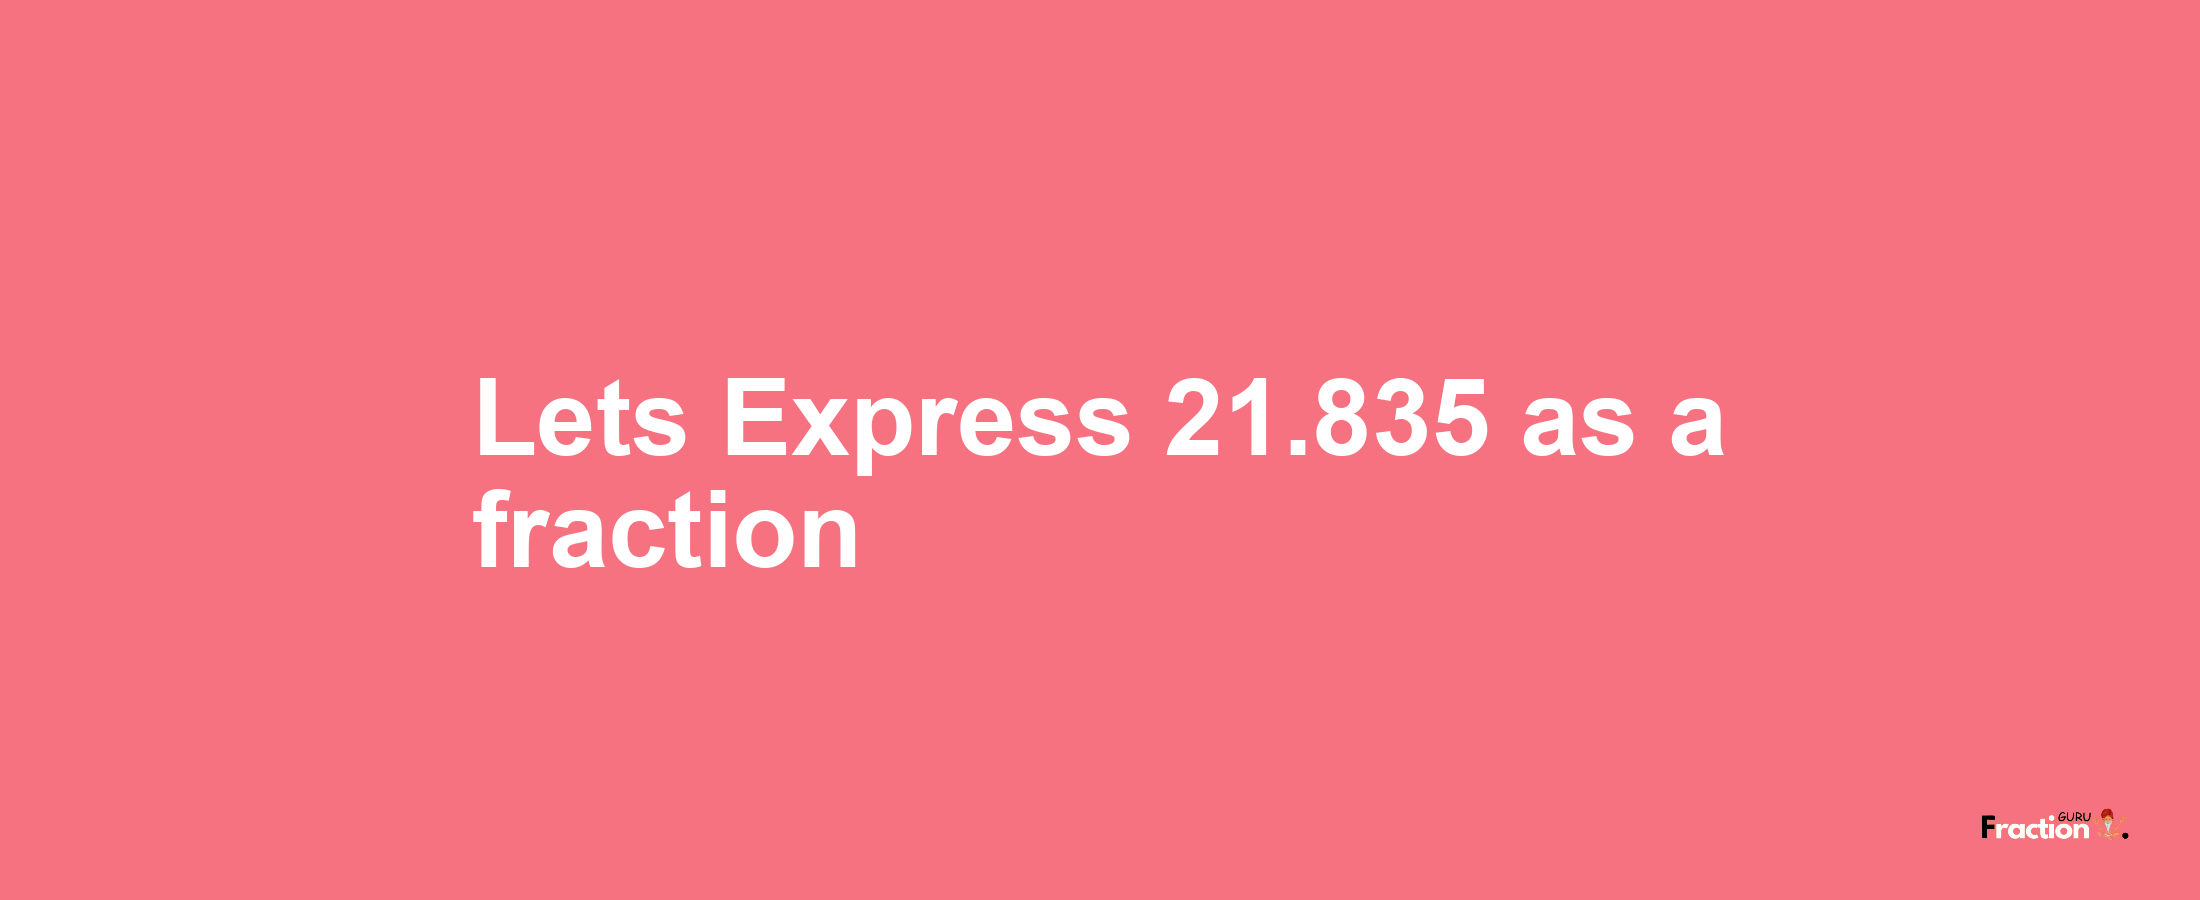 Lets Express 21.835 as afraction